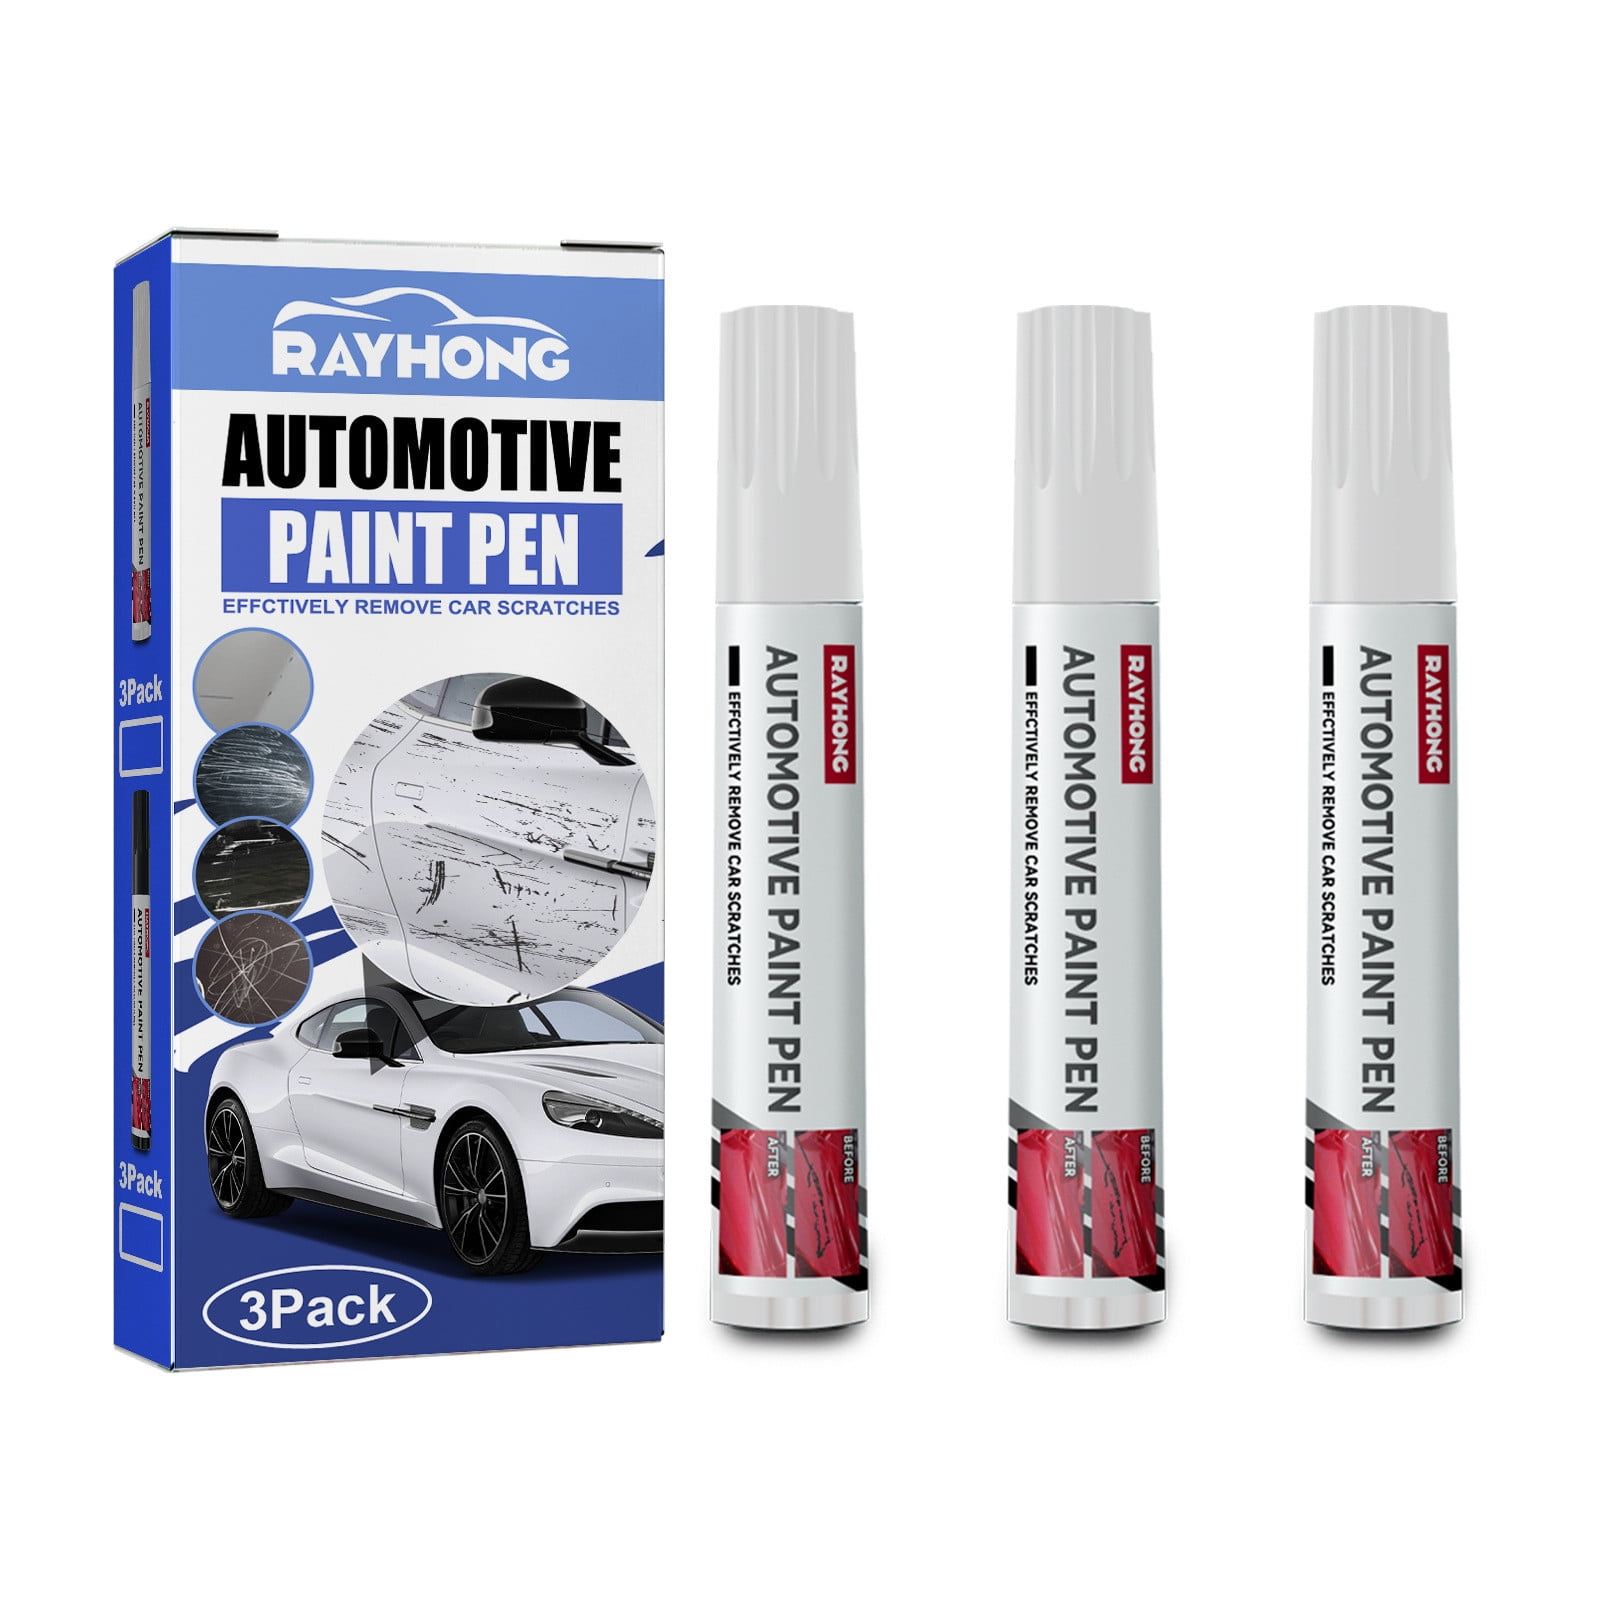 Permanent marker removal from car paint. 